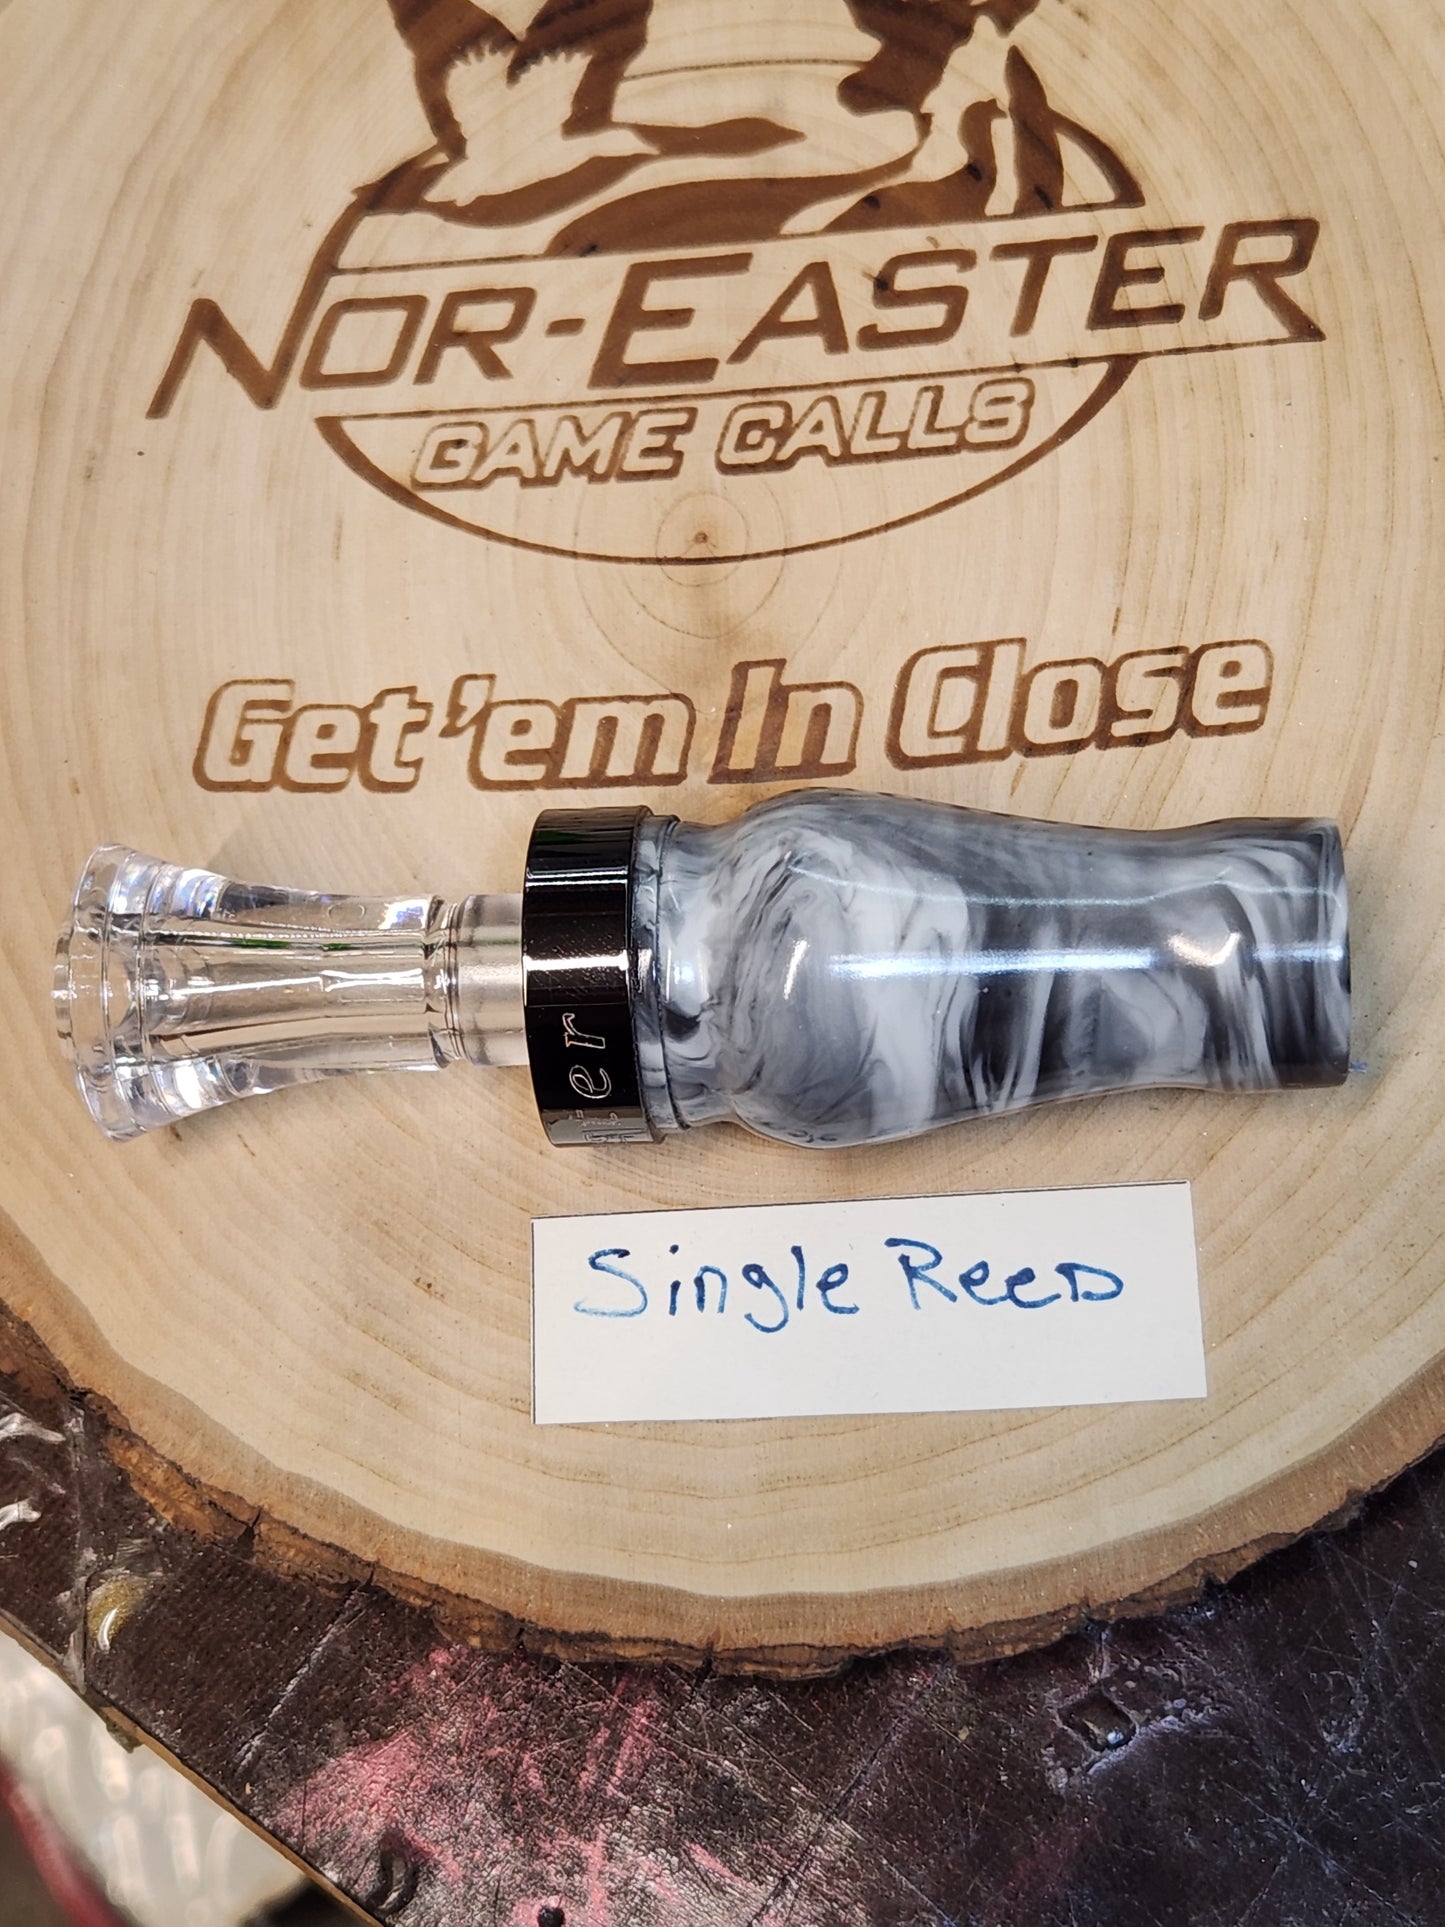 White and black acrylic single reed duck call